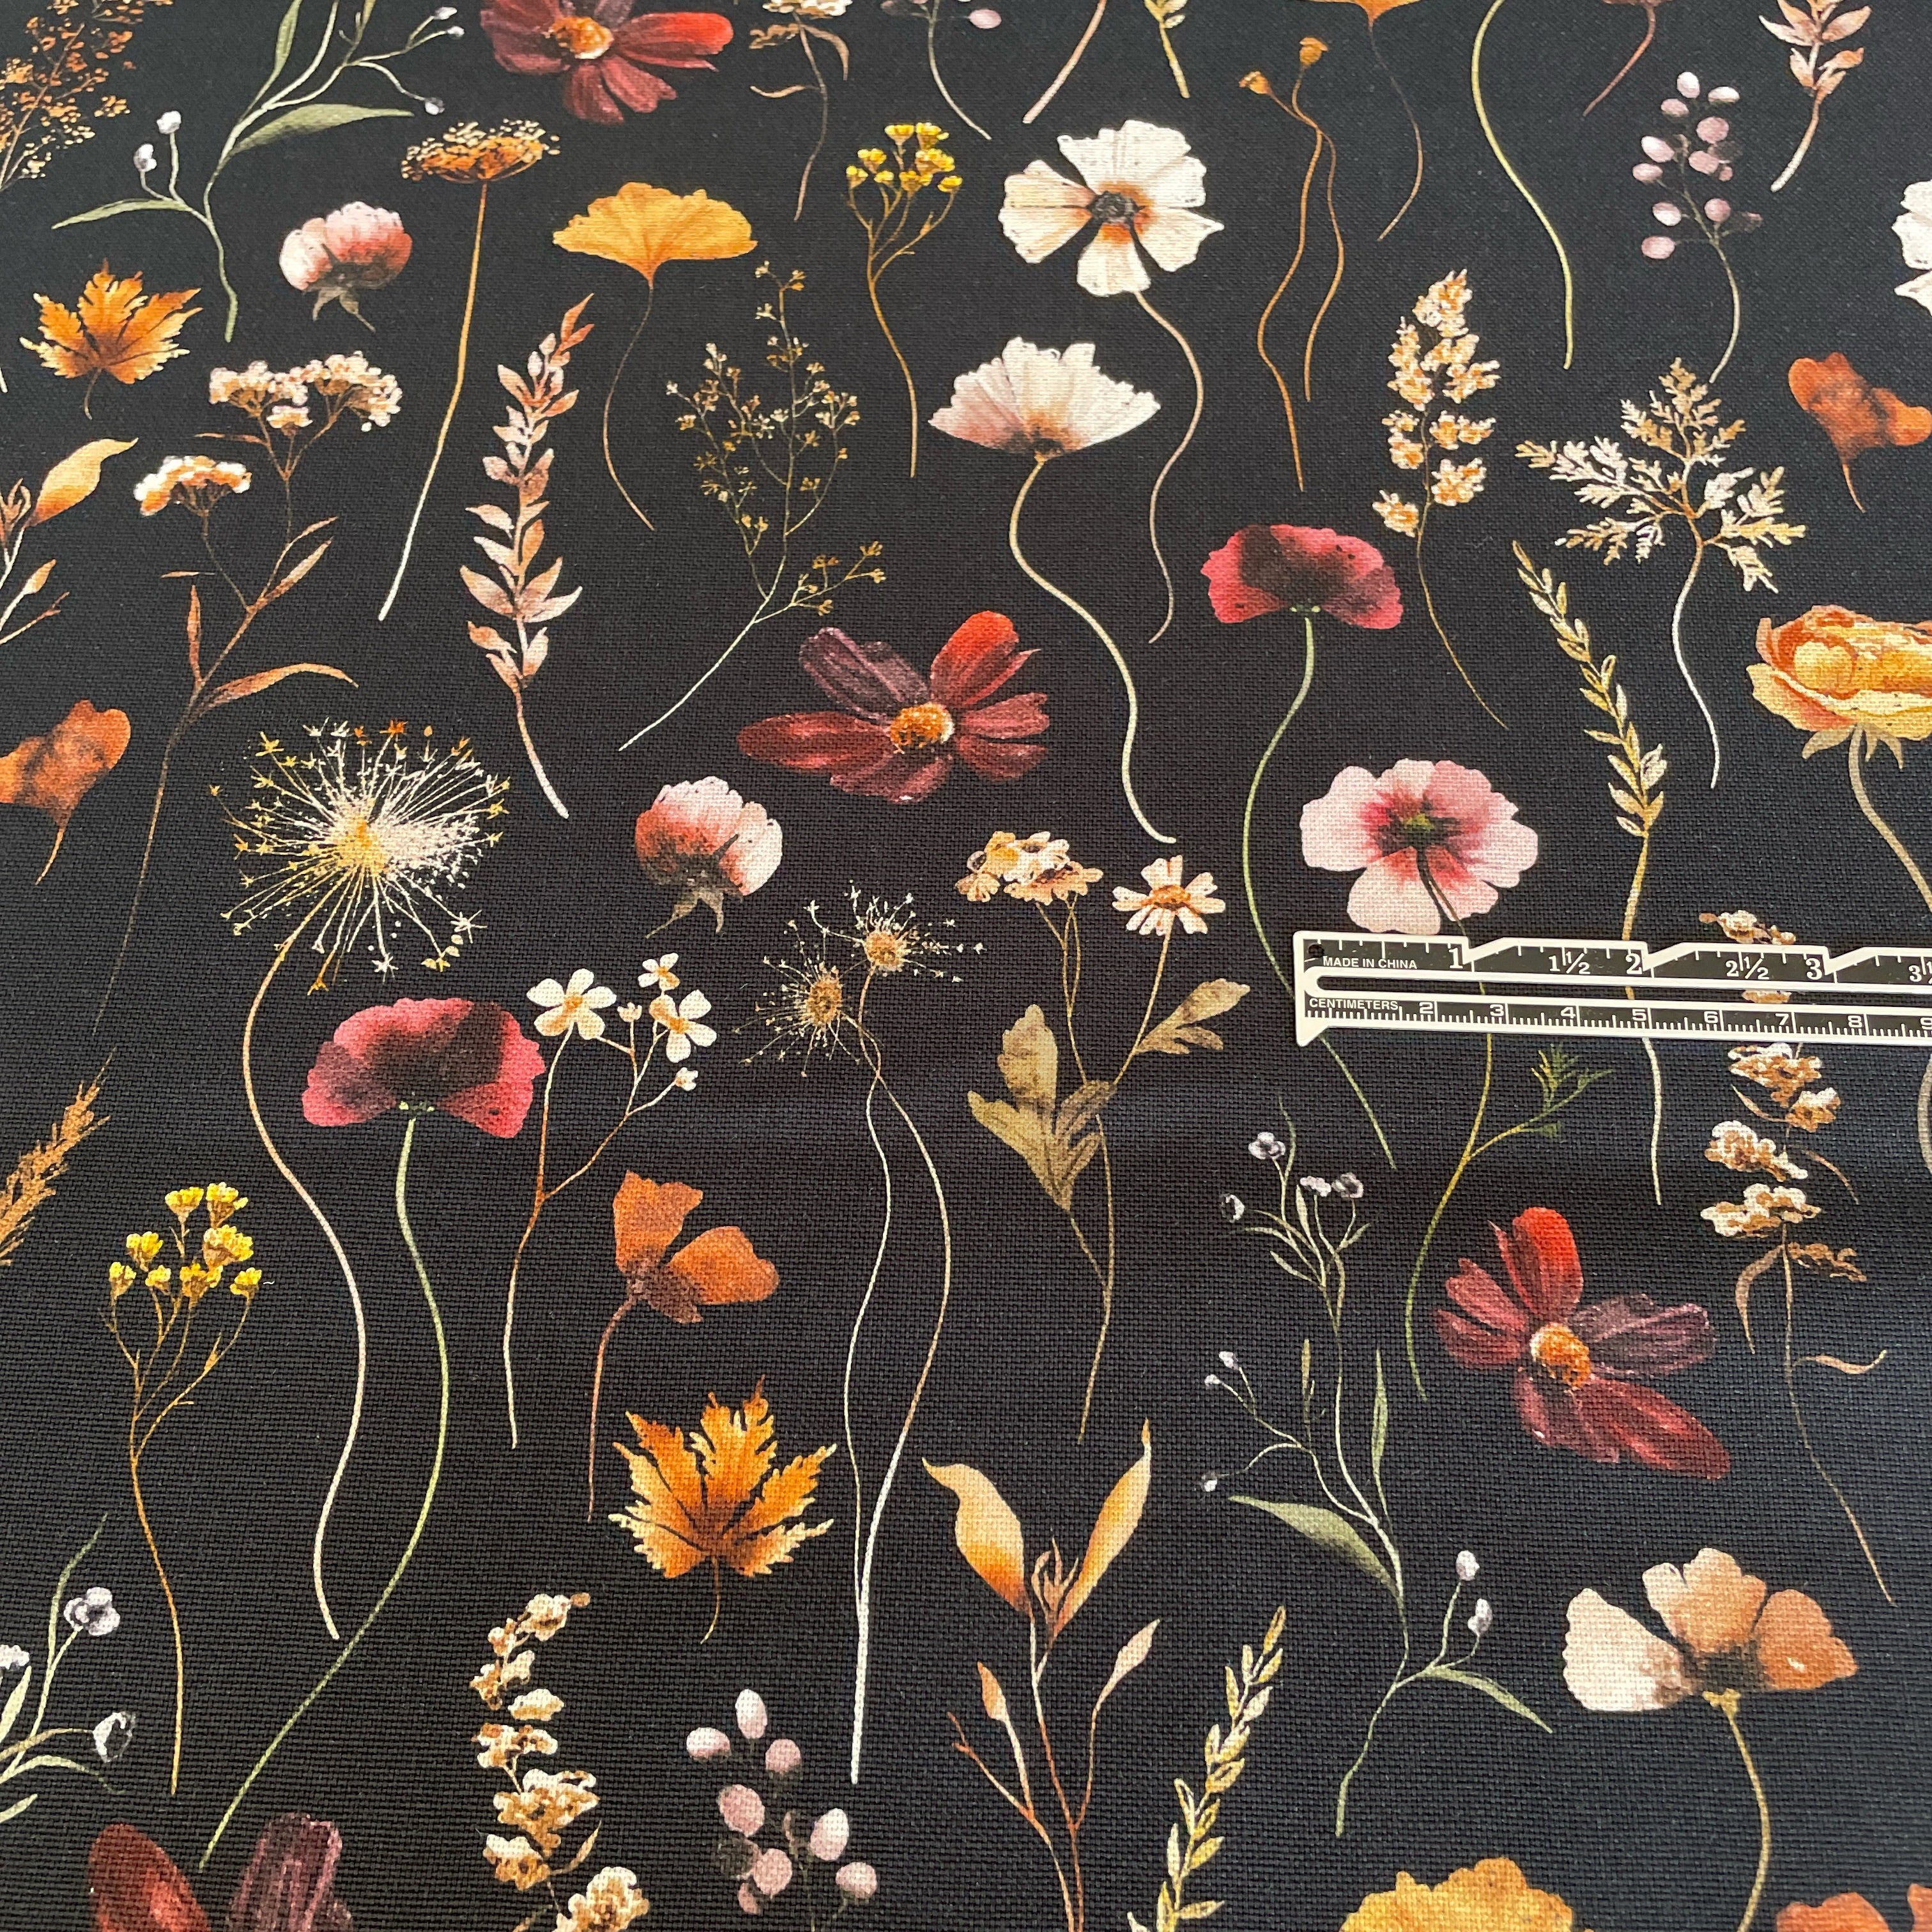 This stunning digitally printed 100% cotton floral design on a black background canvas &nbsp; It is a hardwearing Cotton woven canvas fabric, ideal for clothes, canvas bags, upholstery, etc